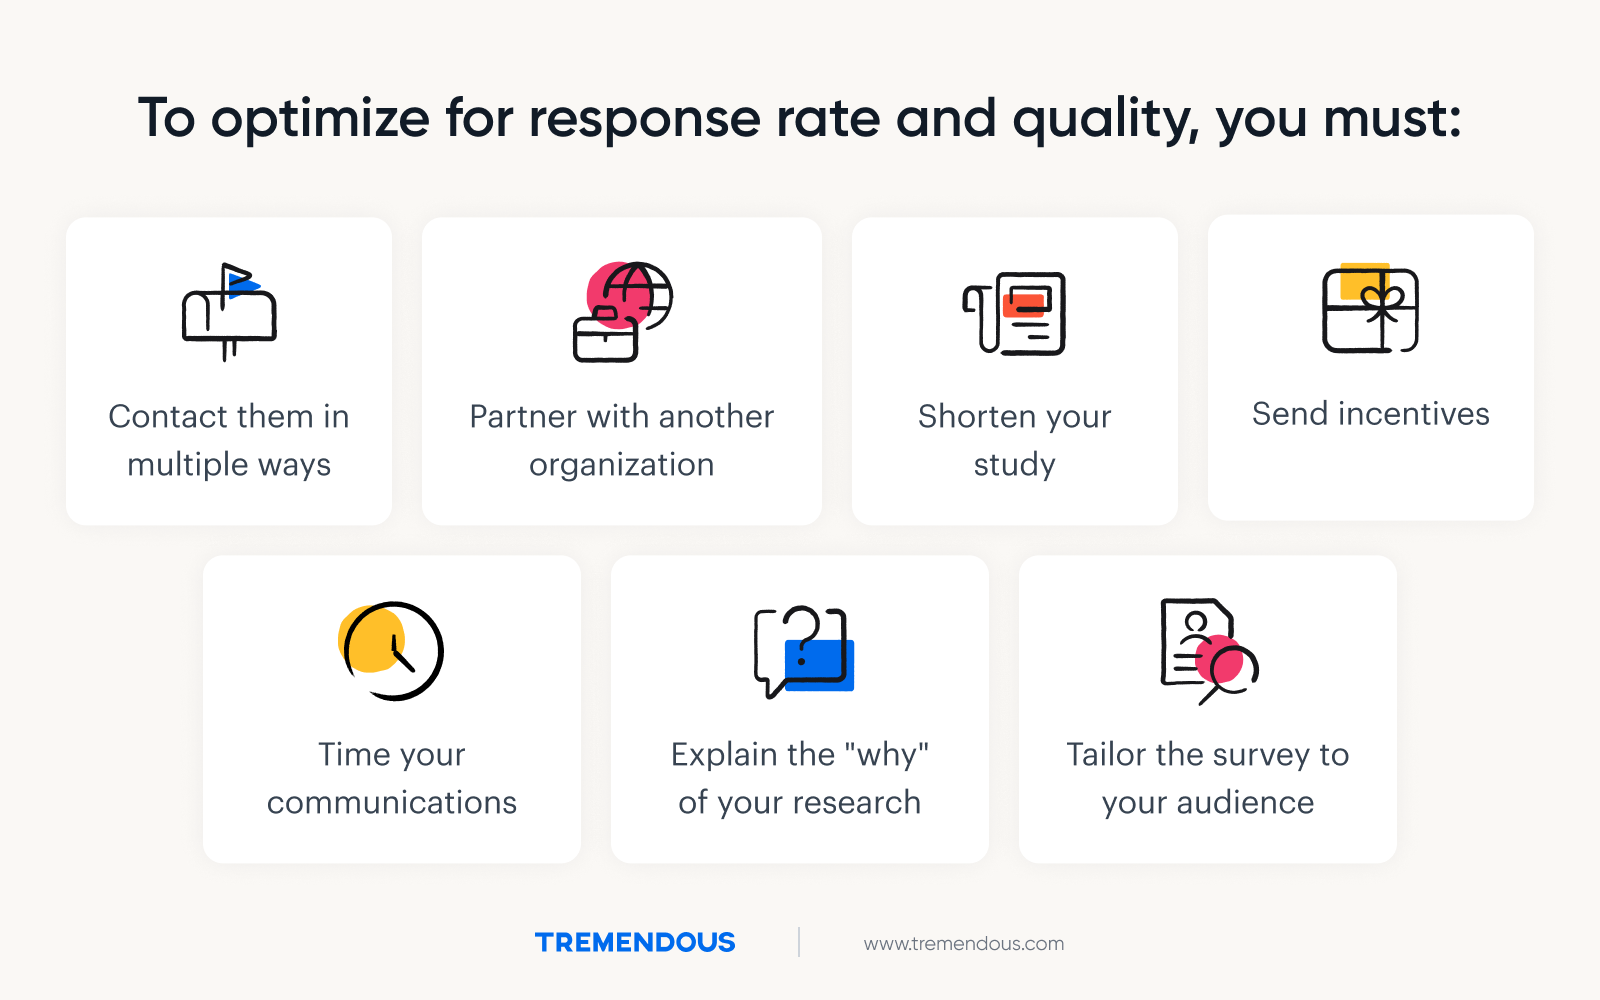 Seven tips on how to improve response rate and quality, including: contact people in multiple ways, partner with another organization, shorten your survey, send incentives, time your communications, explain why you're doing your research, and tailor the survey to the audience.